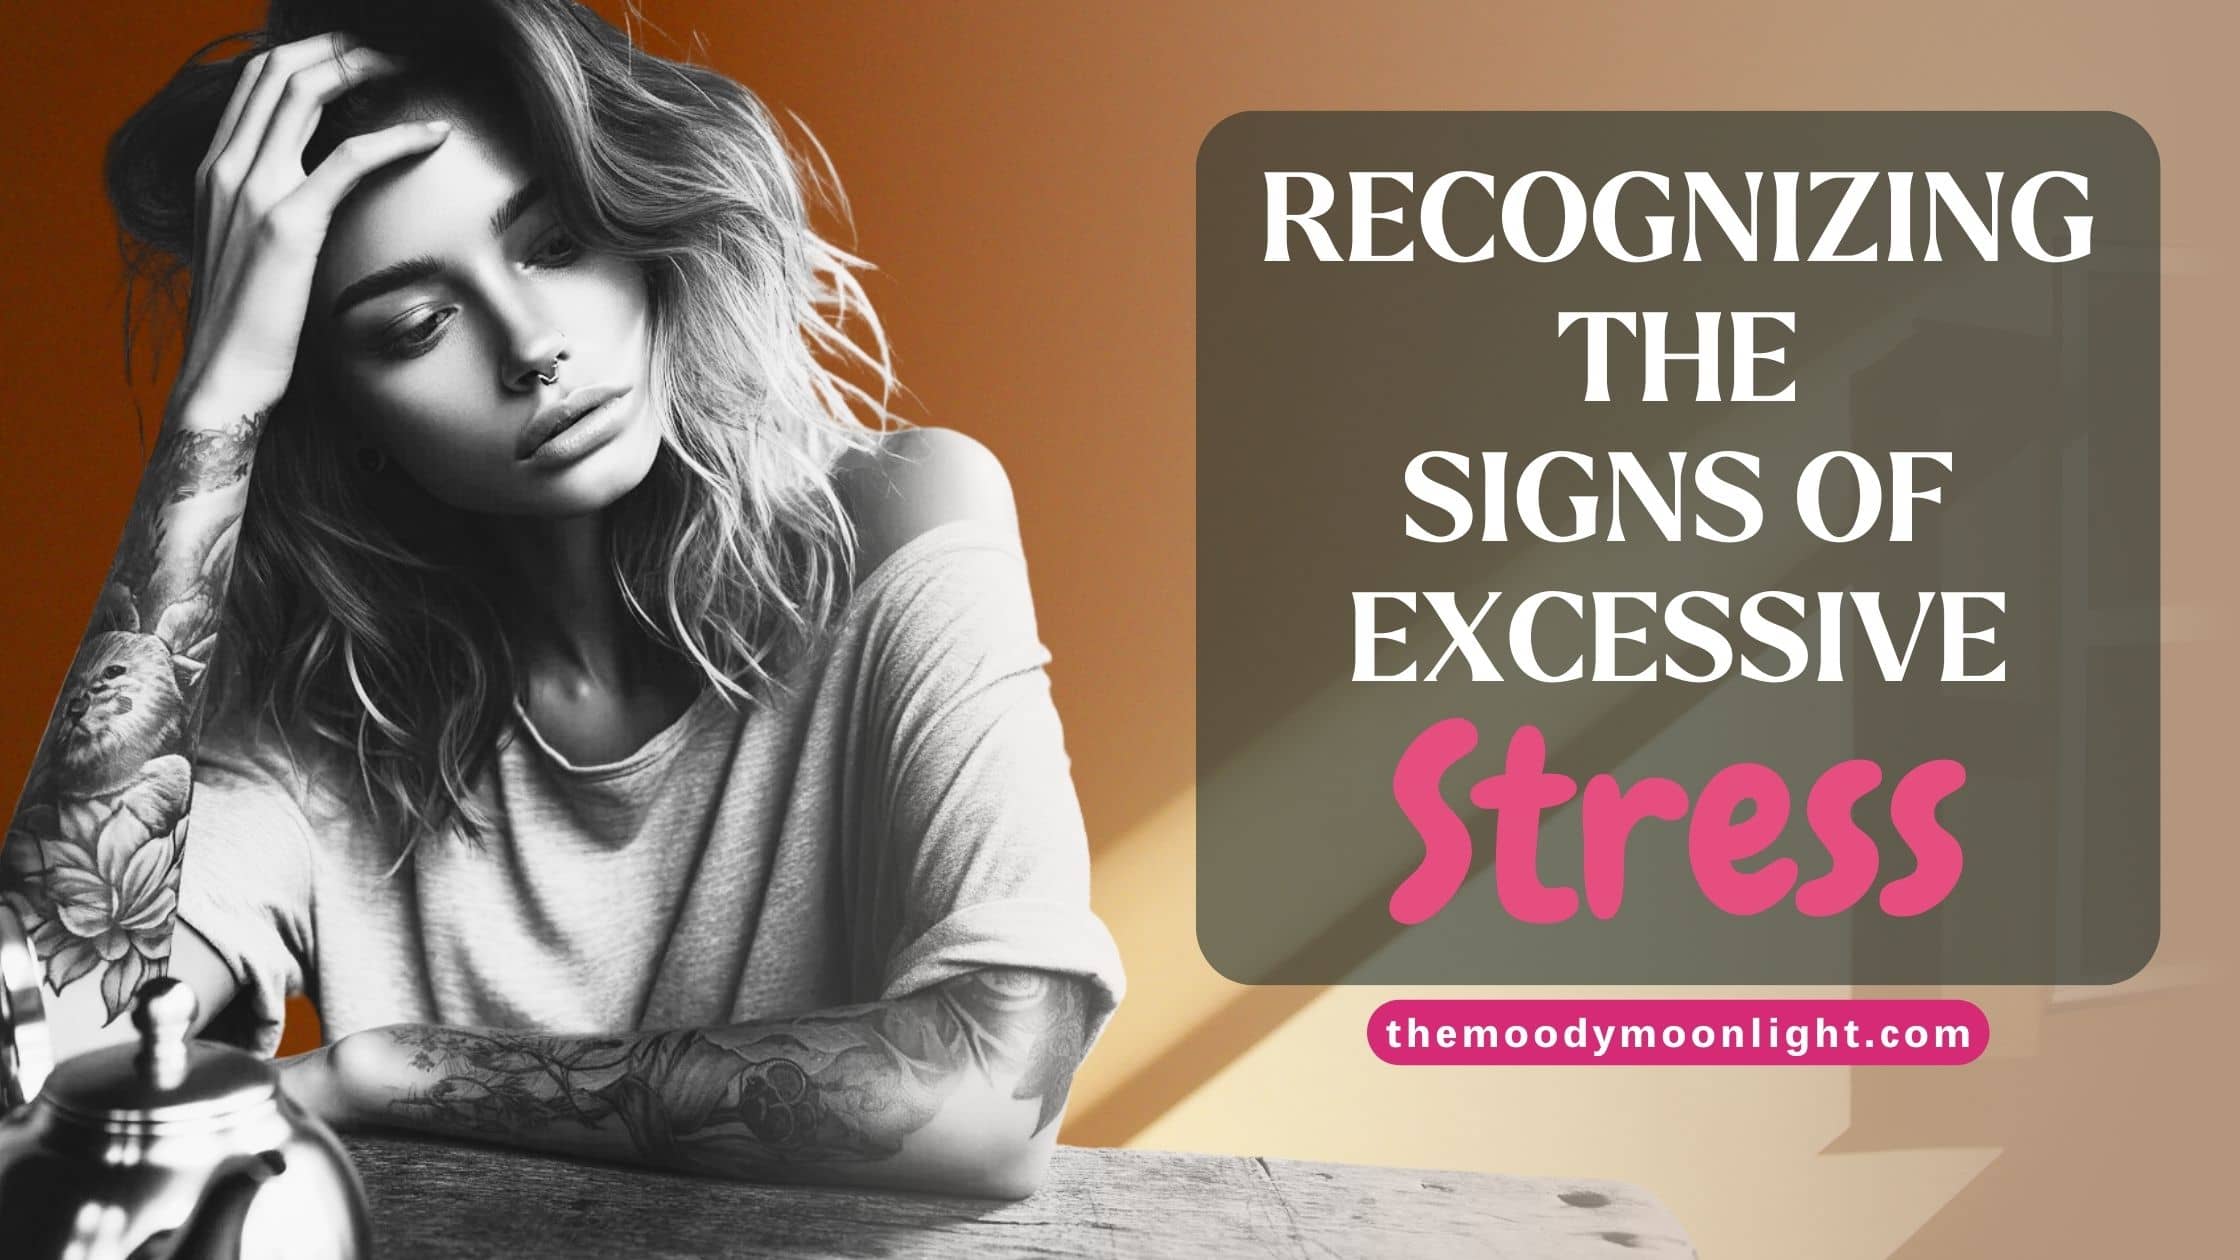 Recognizing the Signs of Excessive Stress